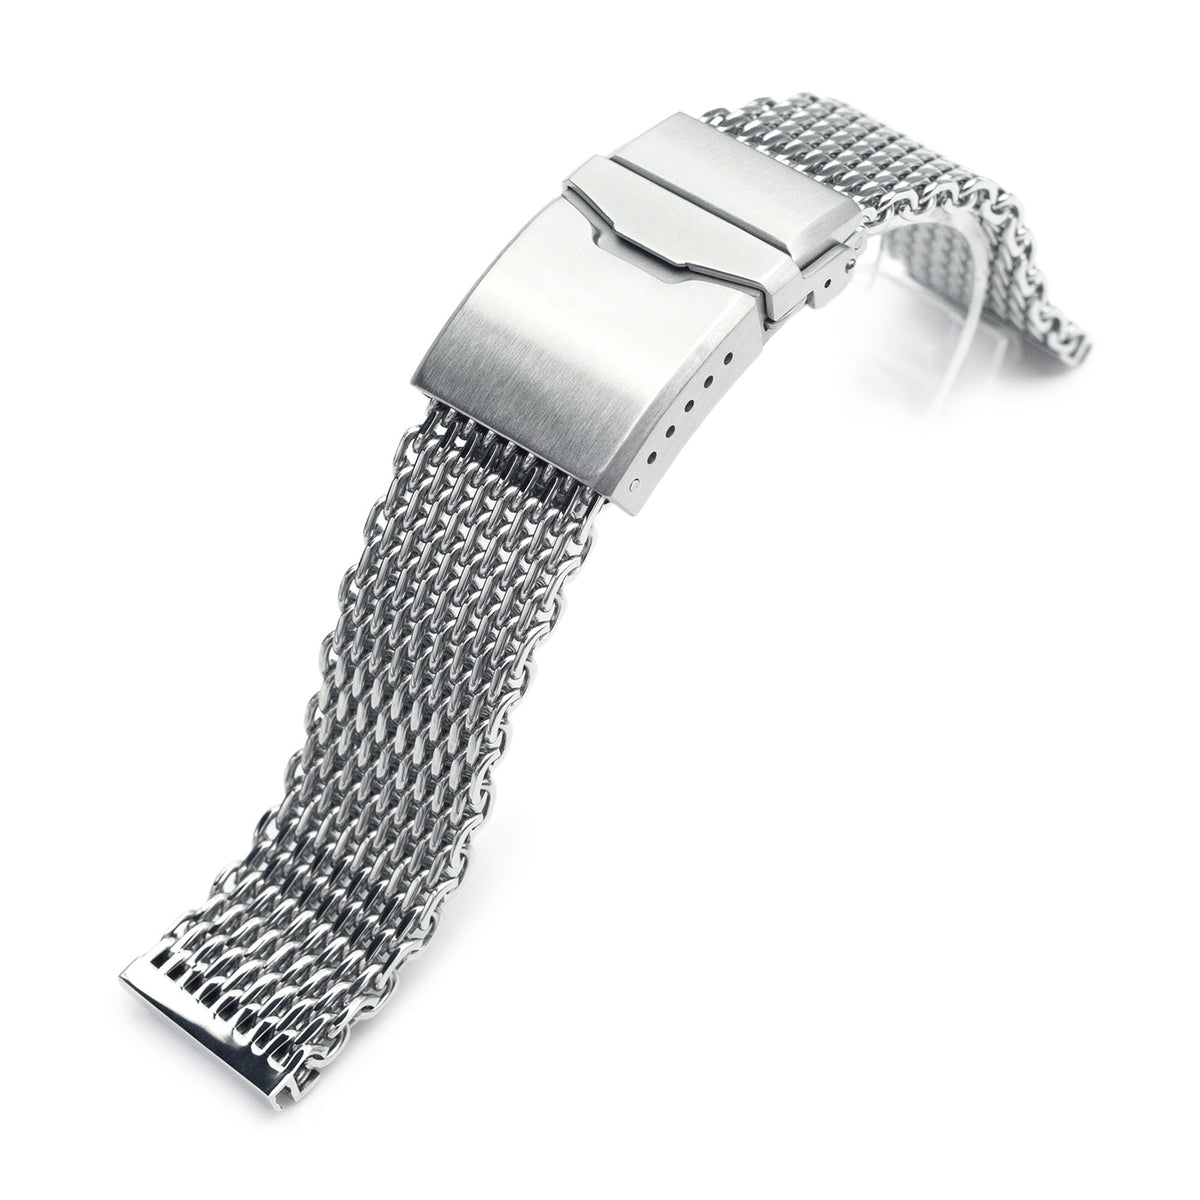 22mm Winghead SHARK Mesh Band Stainless Steel Watch Bracelet Button Chamfer Clasp Polished Strapcode Watch Bands